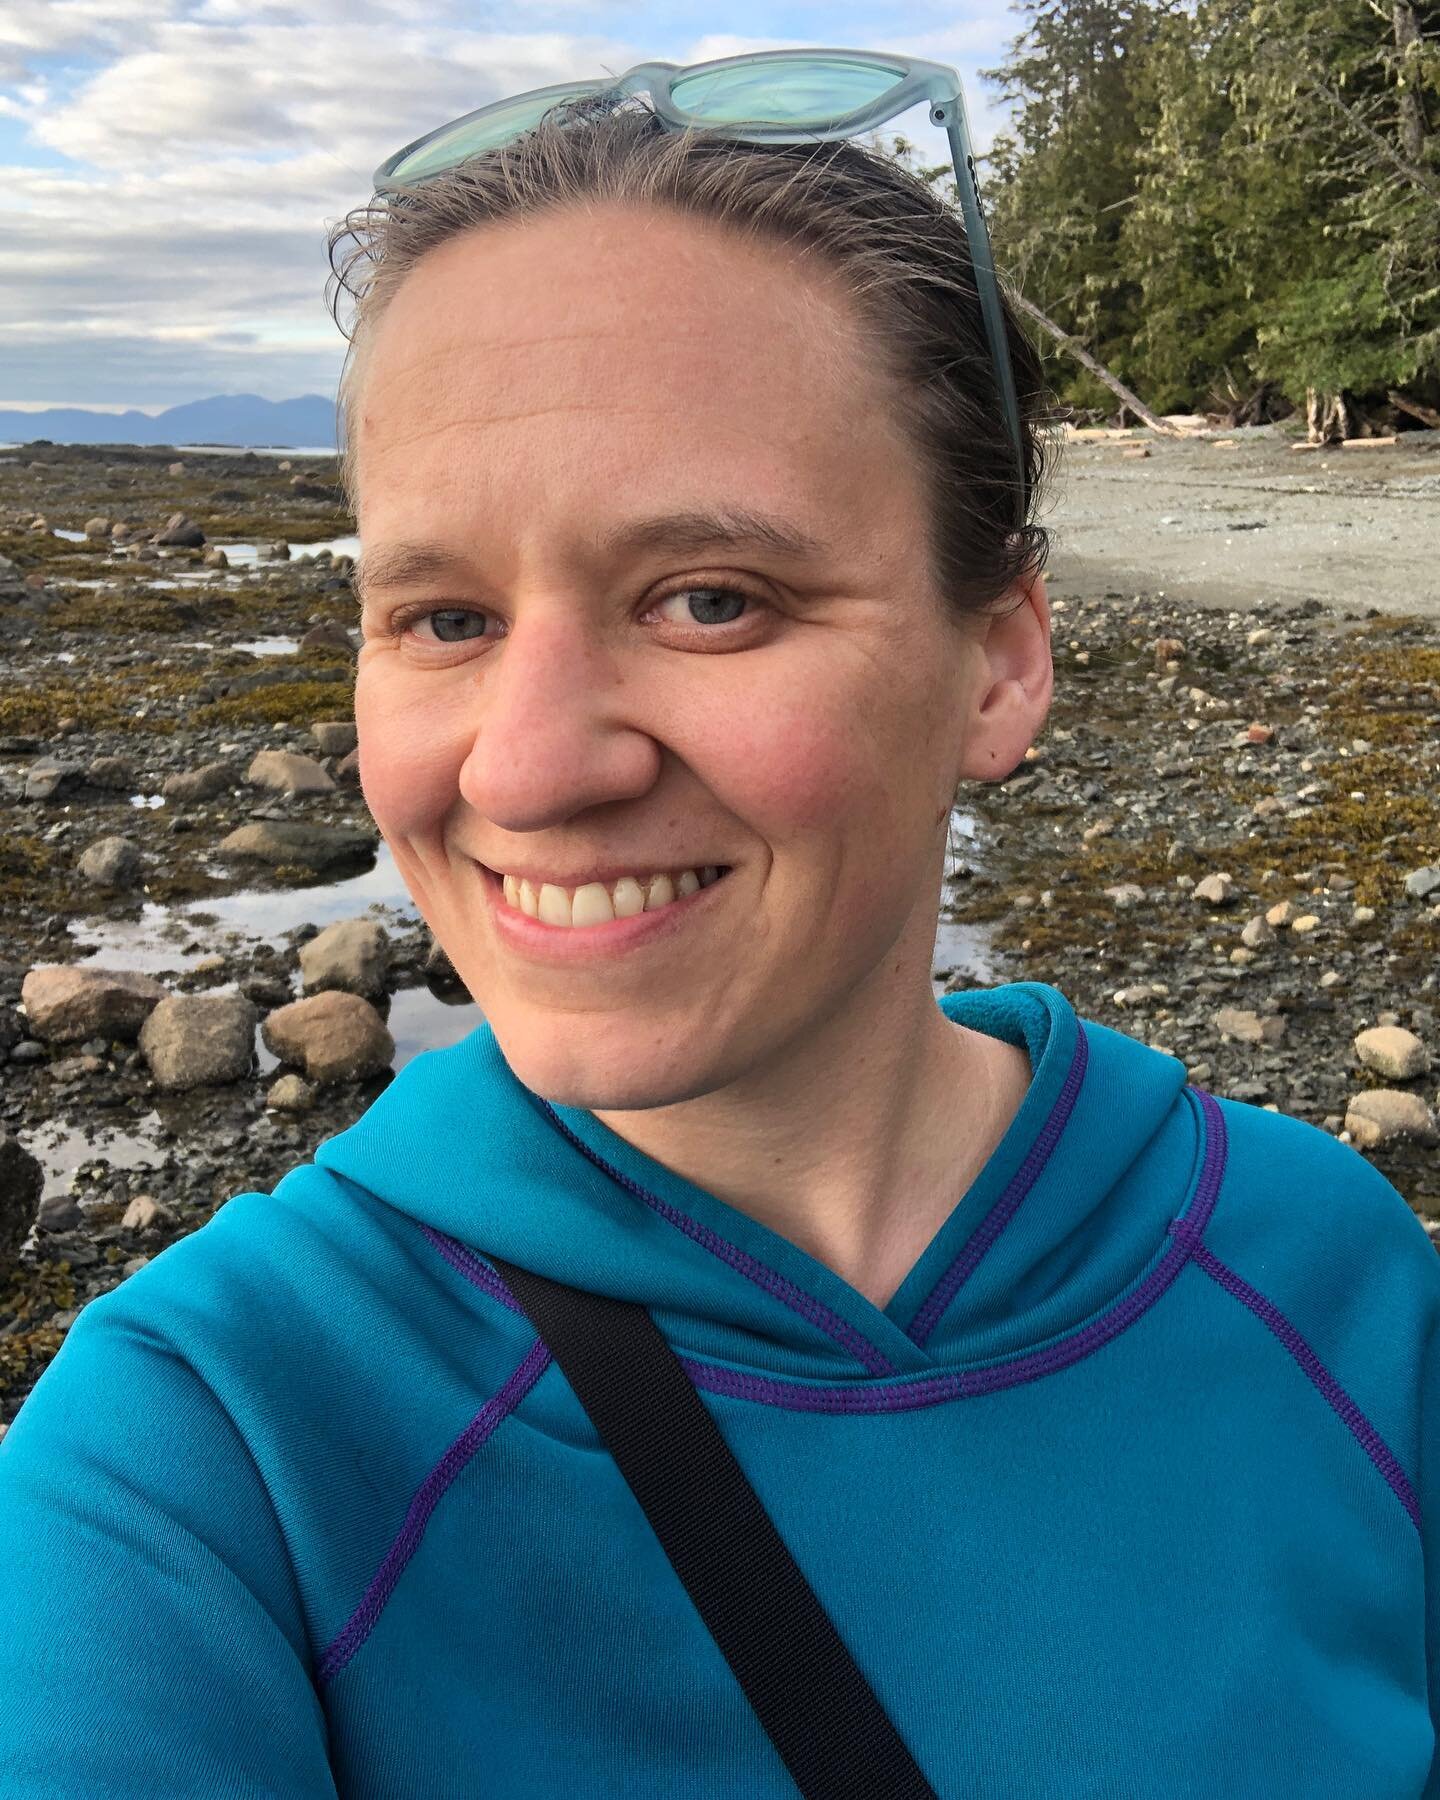 Tired but grateful. I just finished my last teaching artist residency of the spring - one week of sketching and nature journaling with Metlakatla elementary students. I&rsquo;ve been traveling around Alaska doing work stuff since April 7!! Three teac